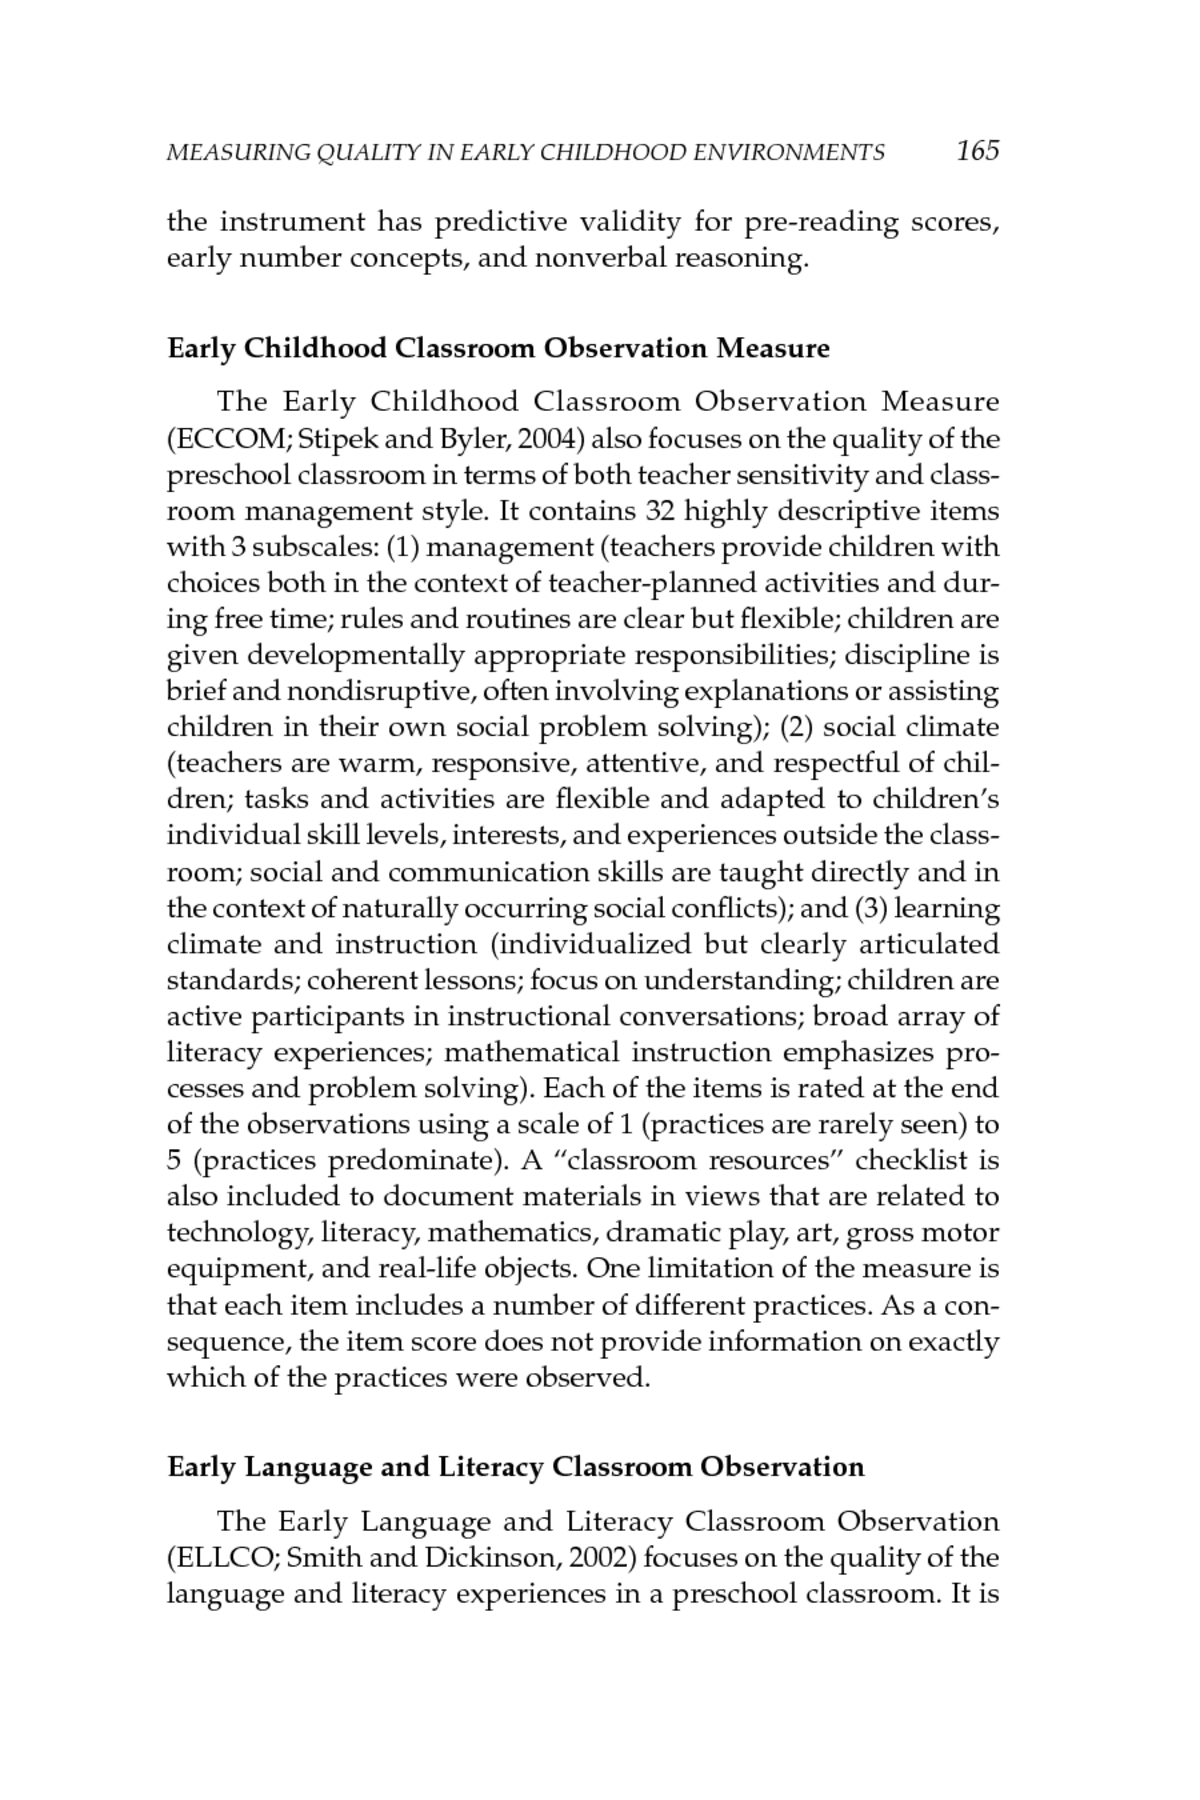 30 Measuring Quality in Early Childhood Environments  Early